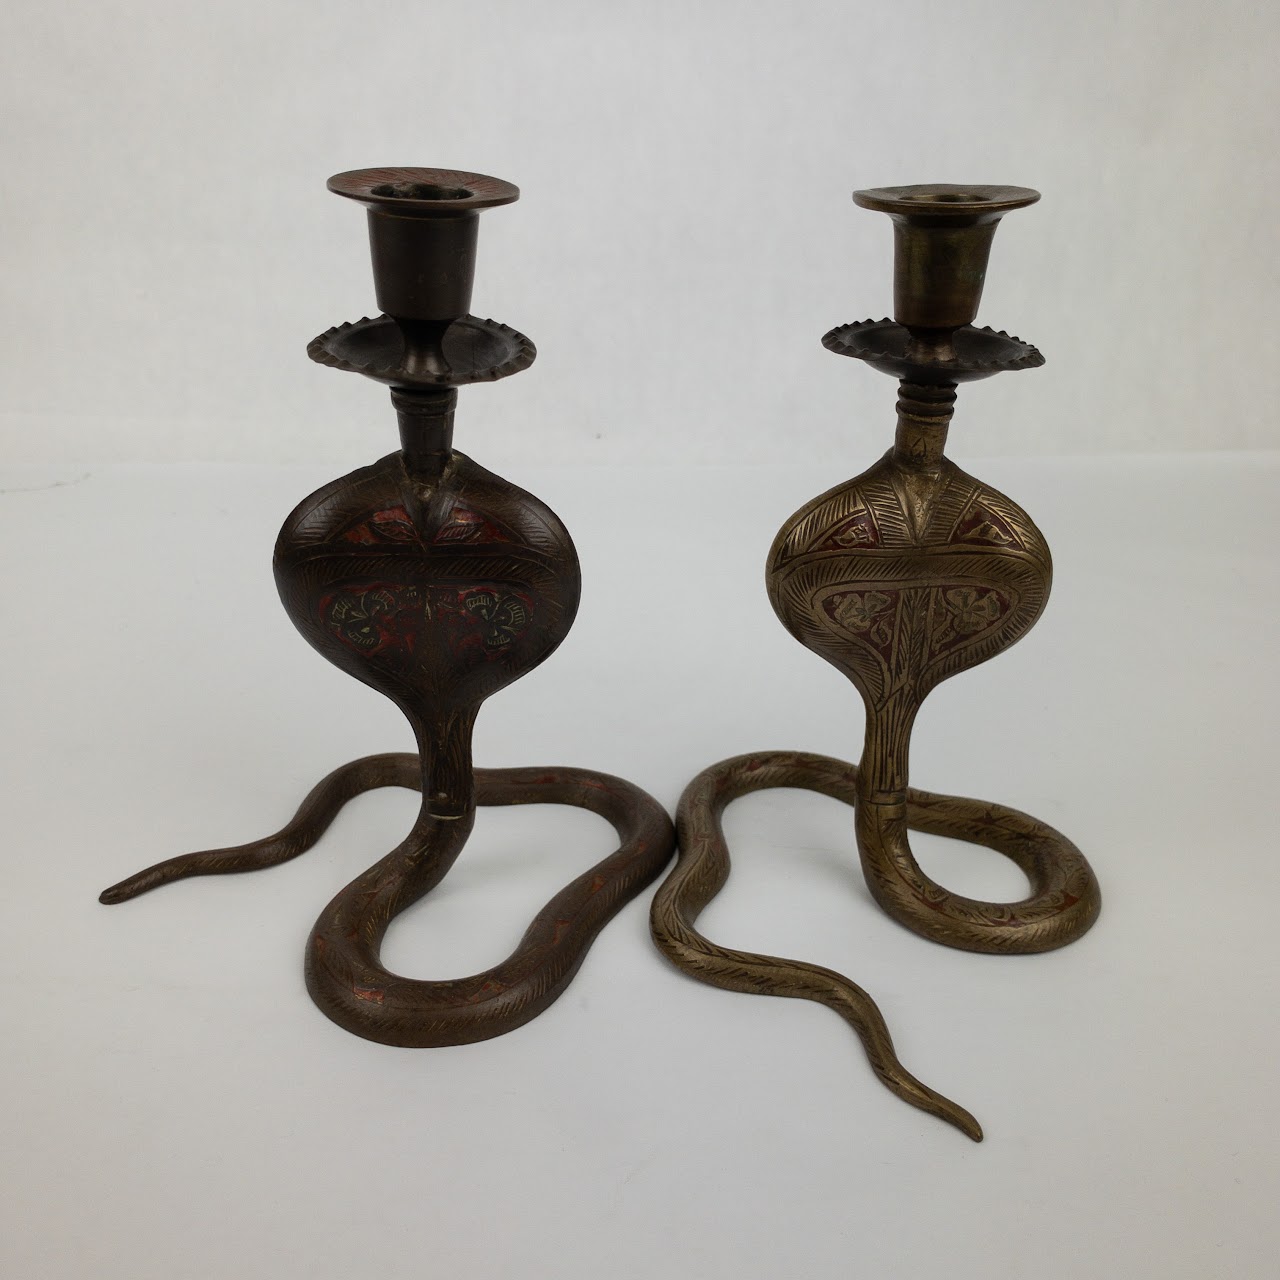 Vintage Brass Cobra Candle Holders, Pair of Snake Candle Sticks